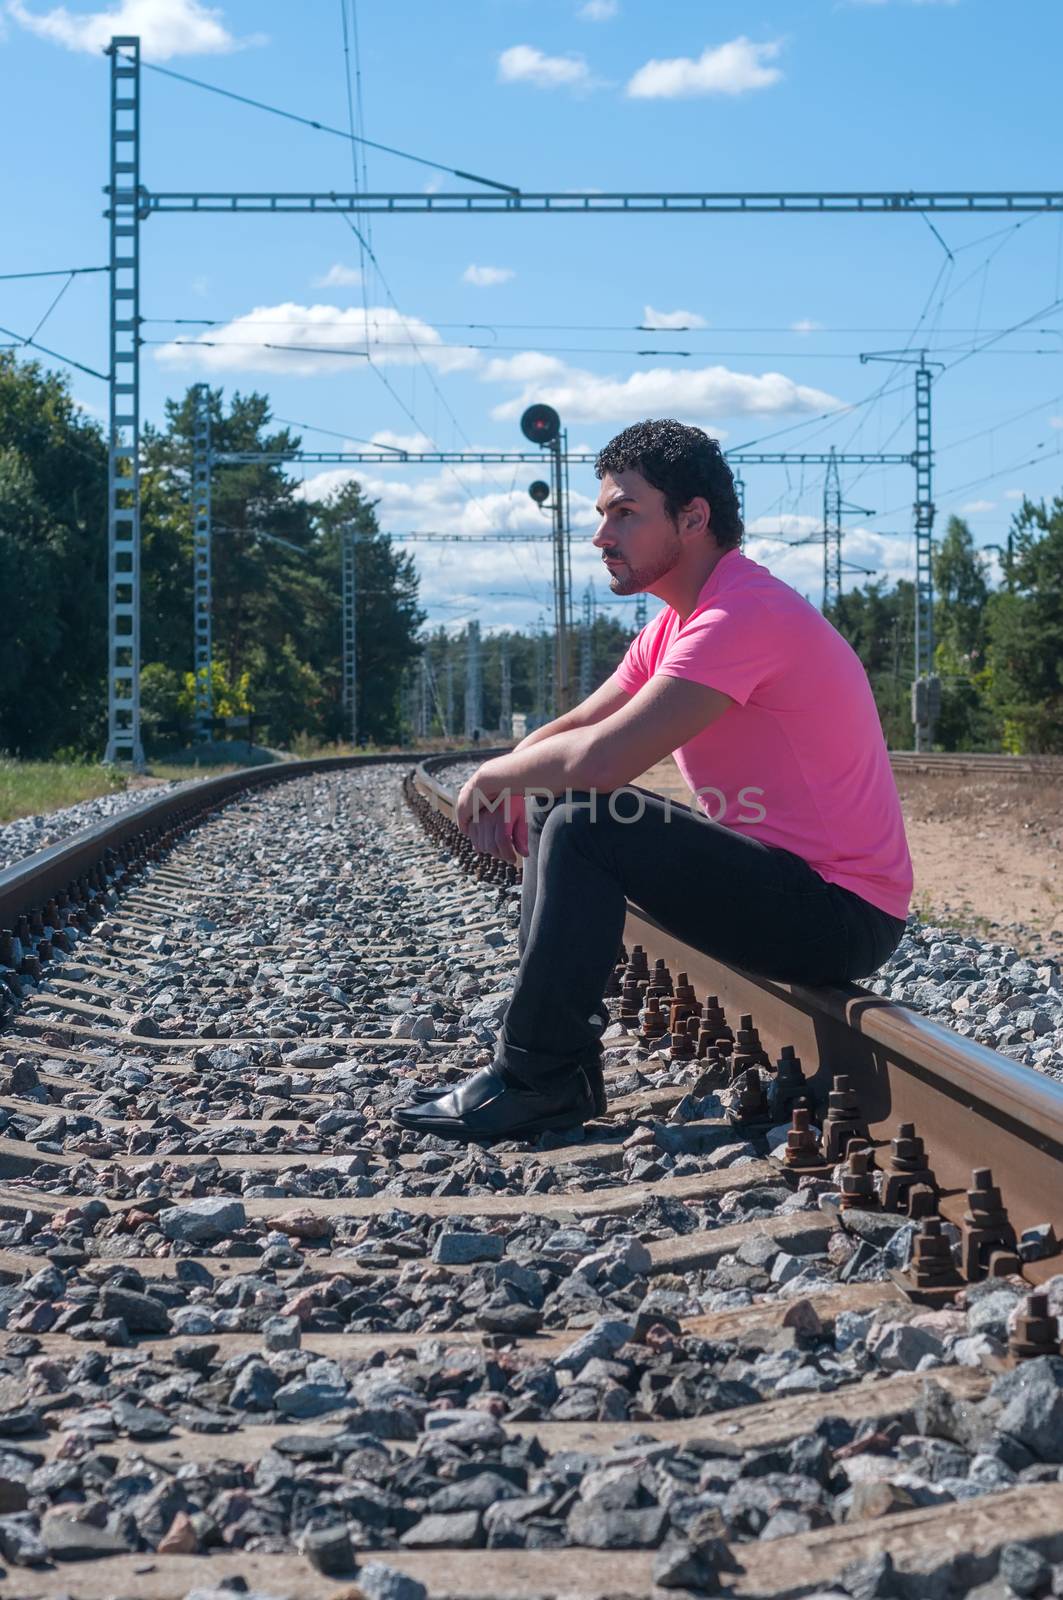 Shot of one man in pink t-shirt sitting on train tracks